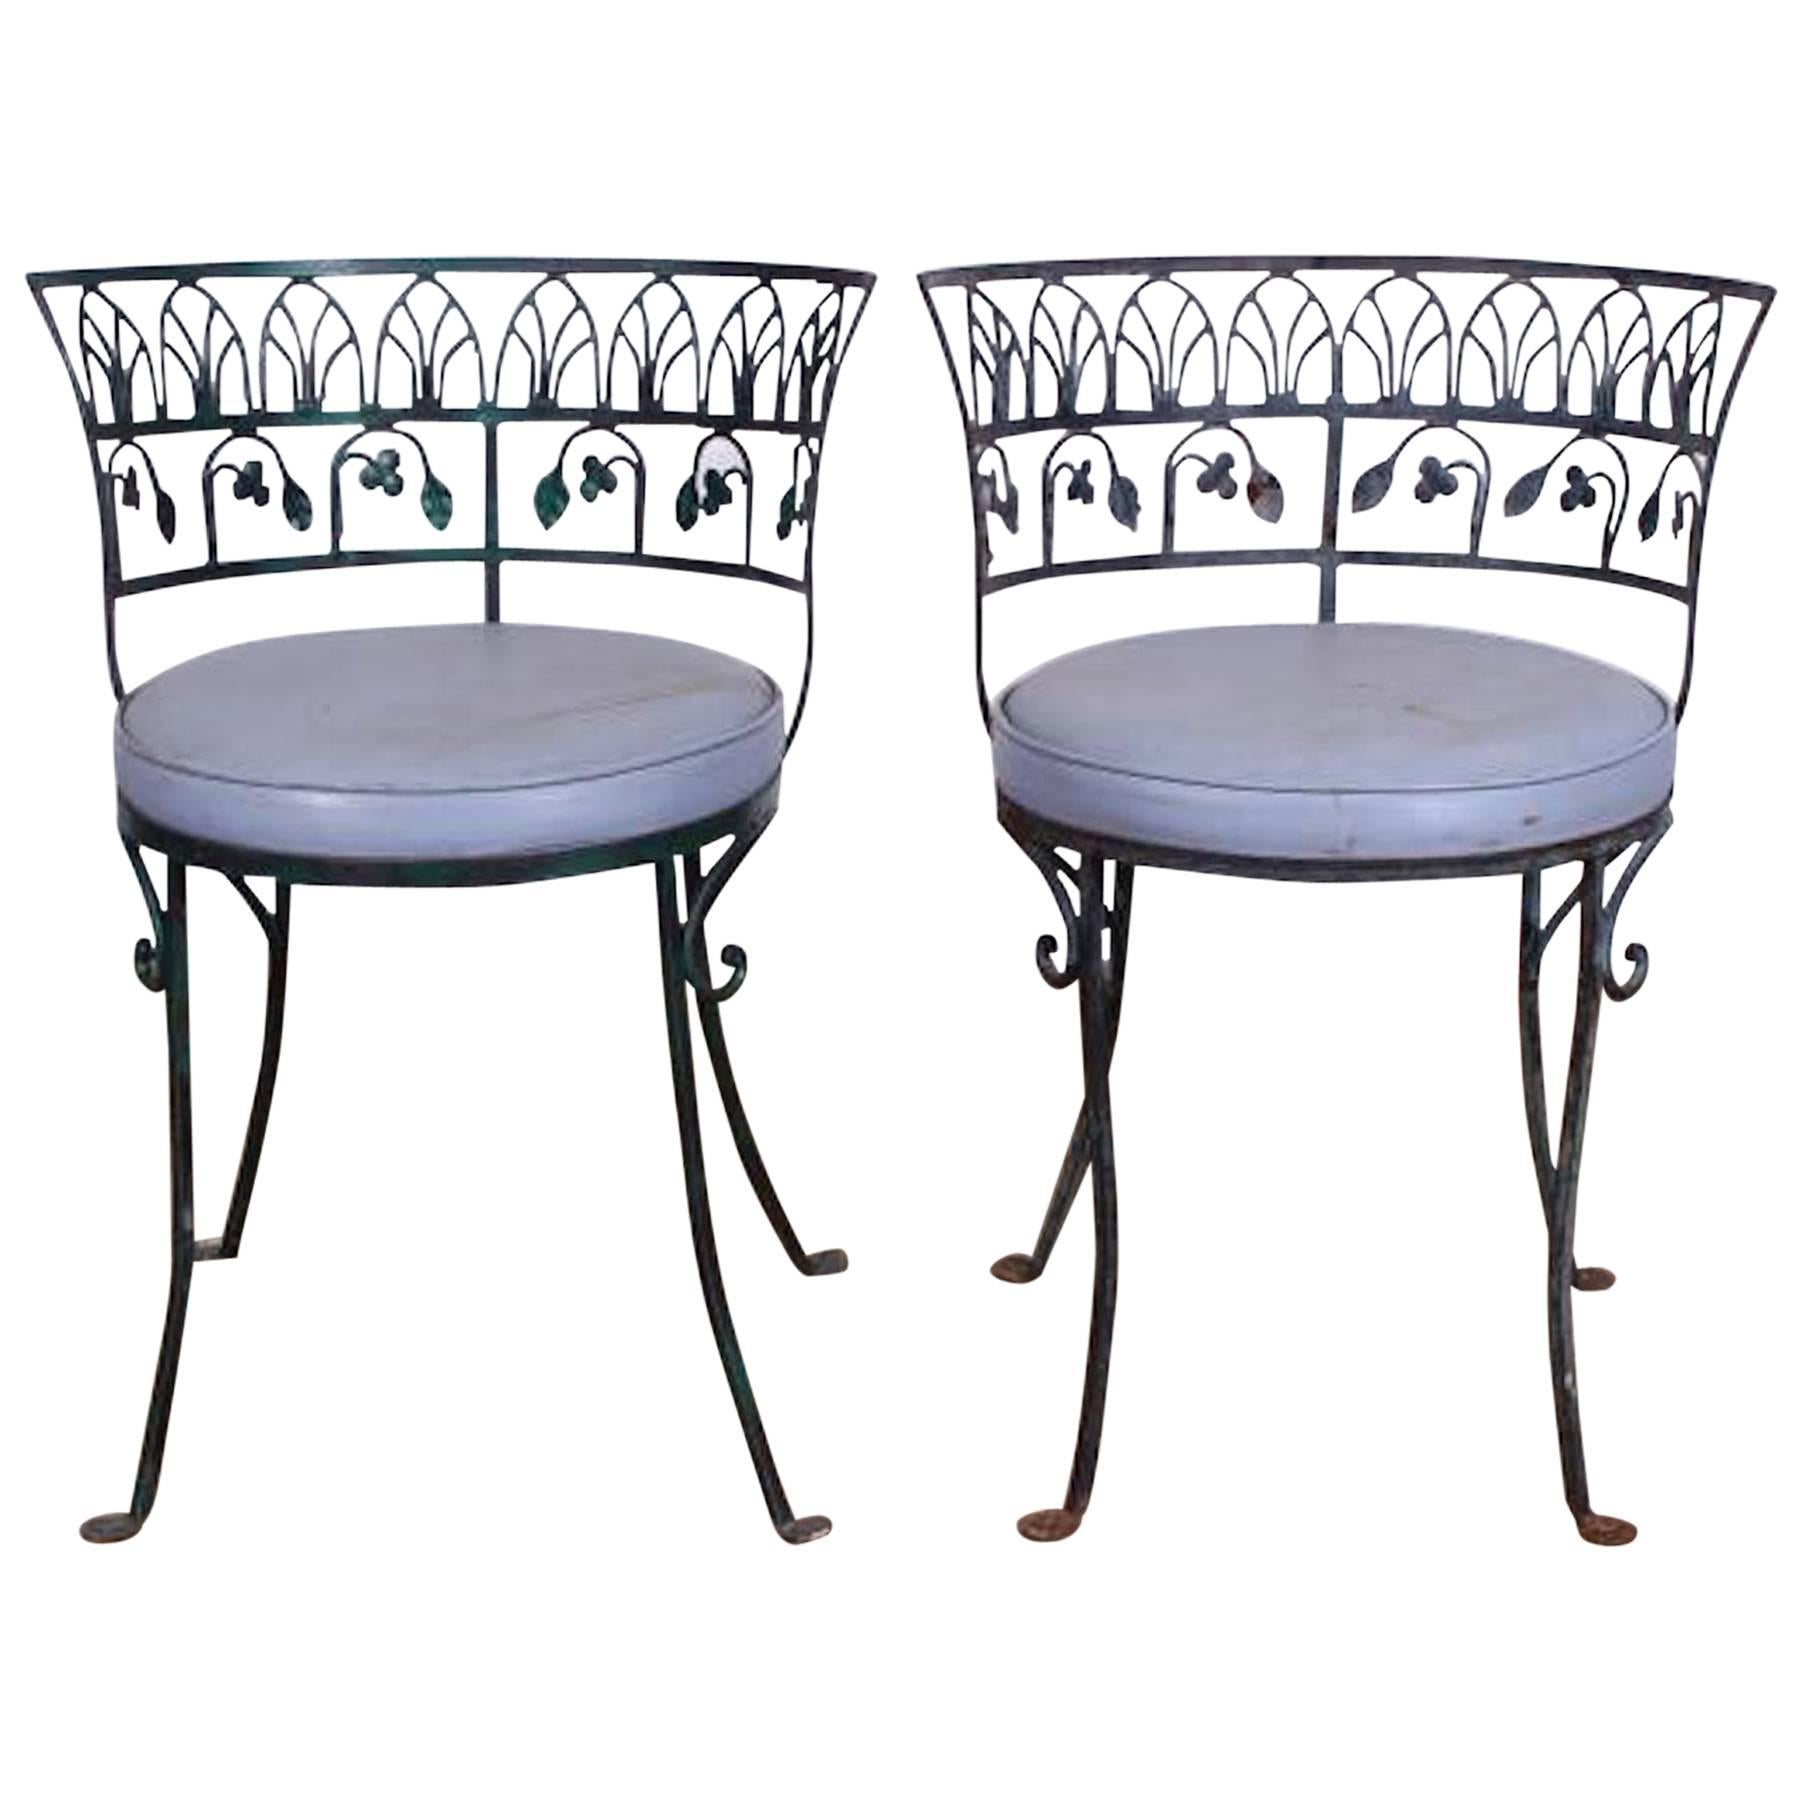 Pair of Grand Tour Style Salterini Garden Chairs, after the Greek Antique